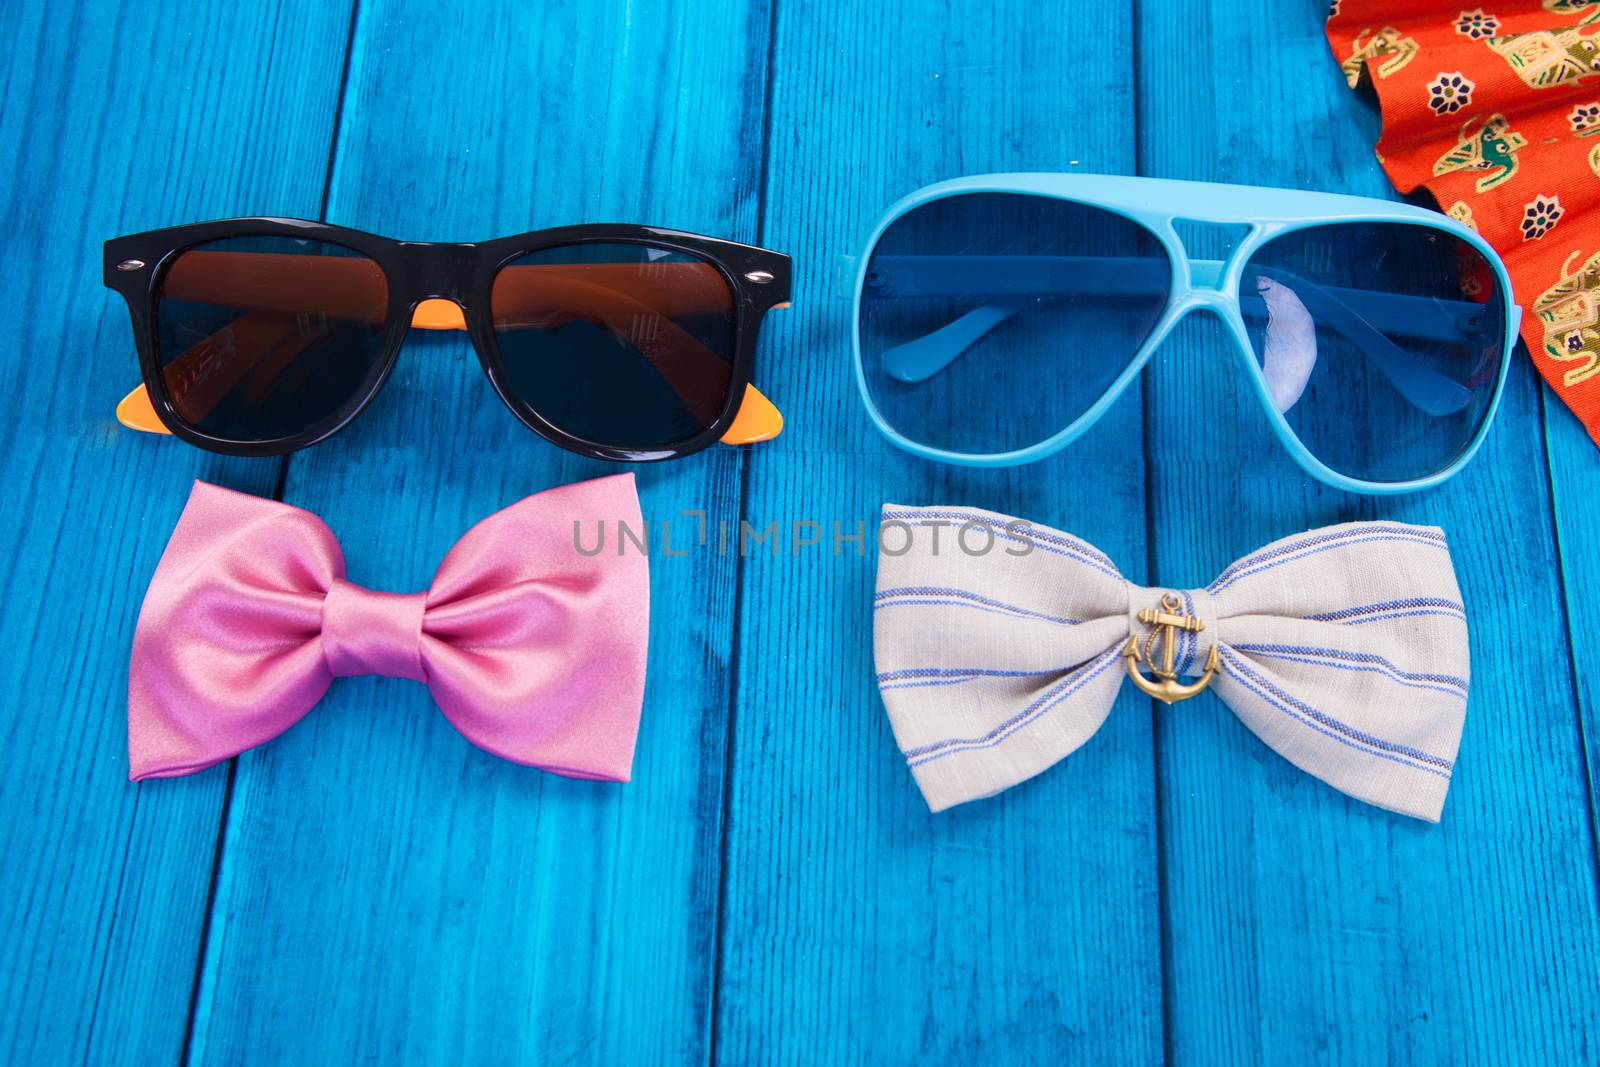 fan with red bow tie and sunglasses on blue wooden background